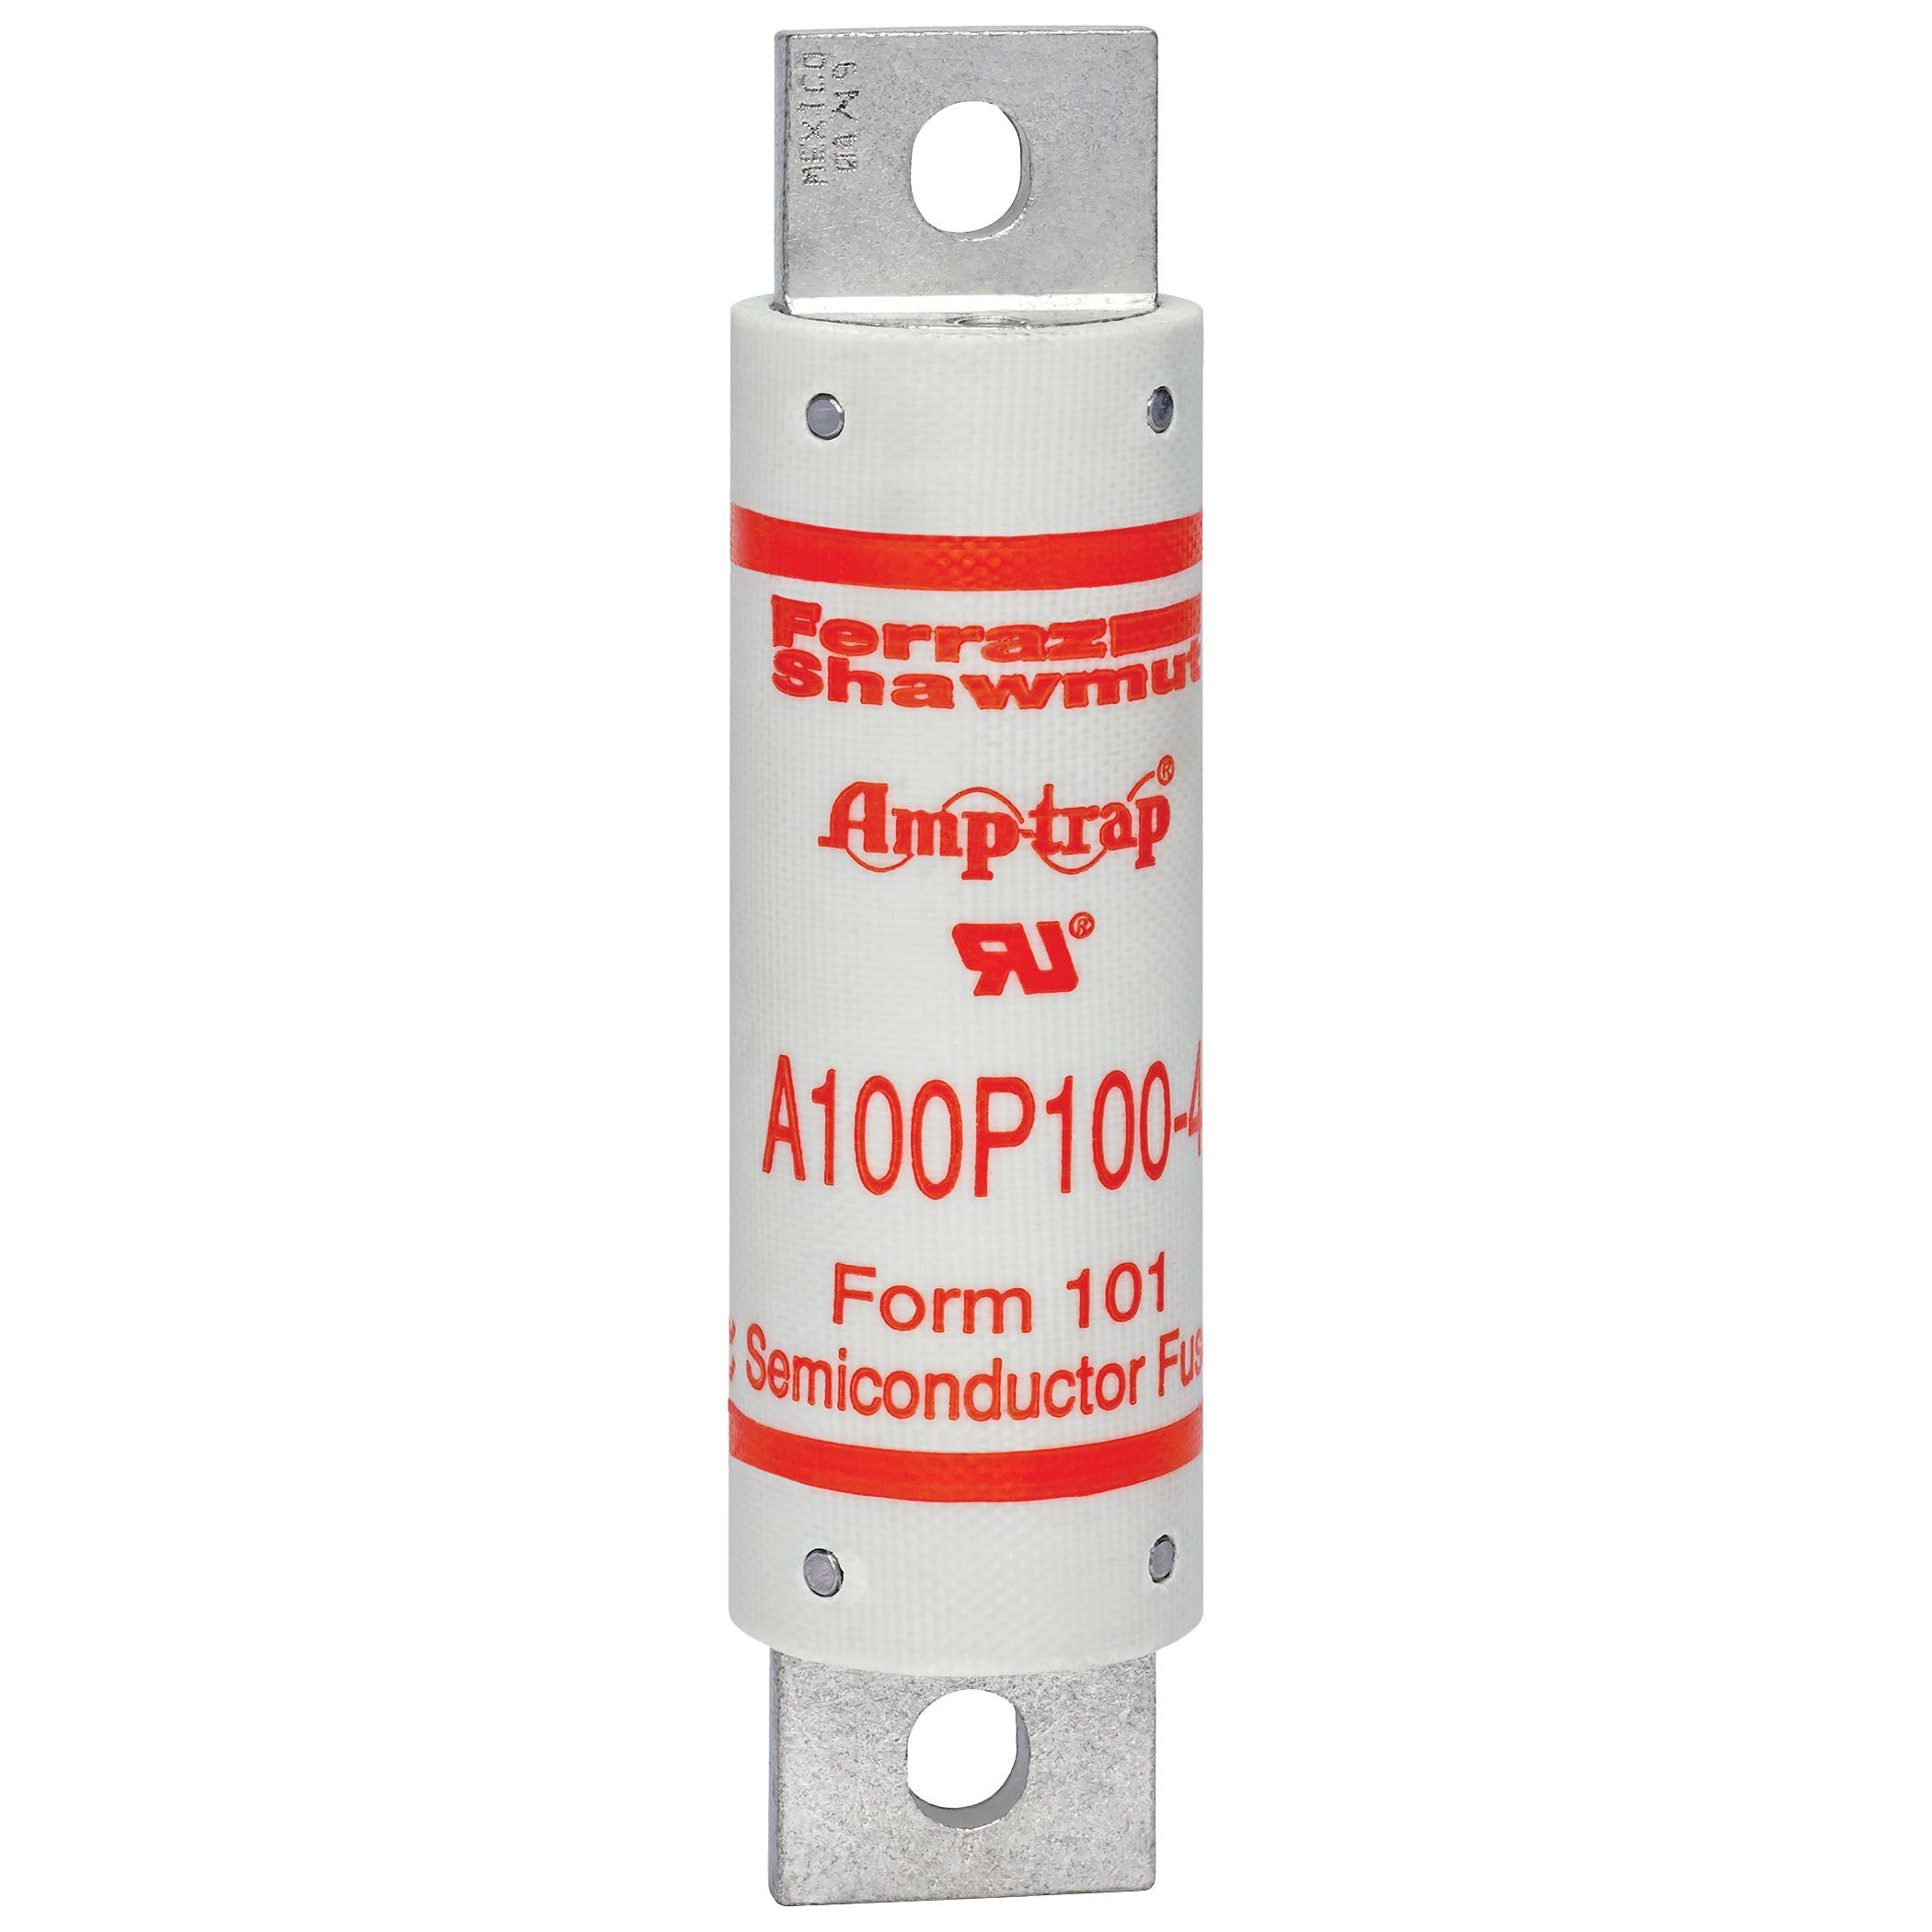 A100P100-4 - Semiconductor Fuse Amp-Trap® 1000V 100A aR High Speed A100P